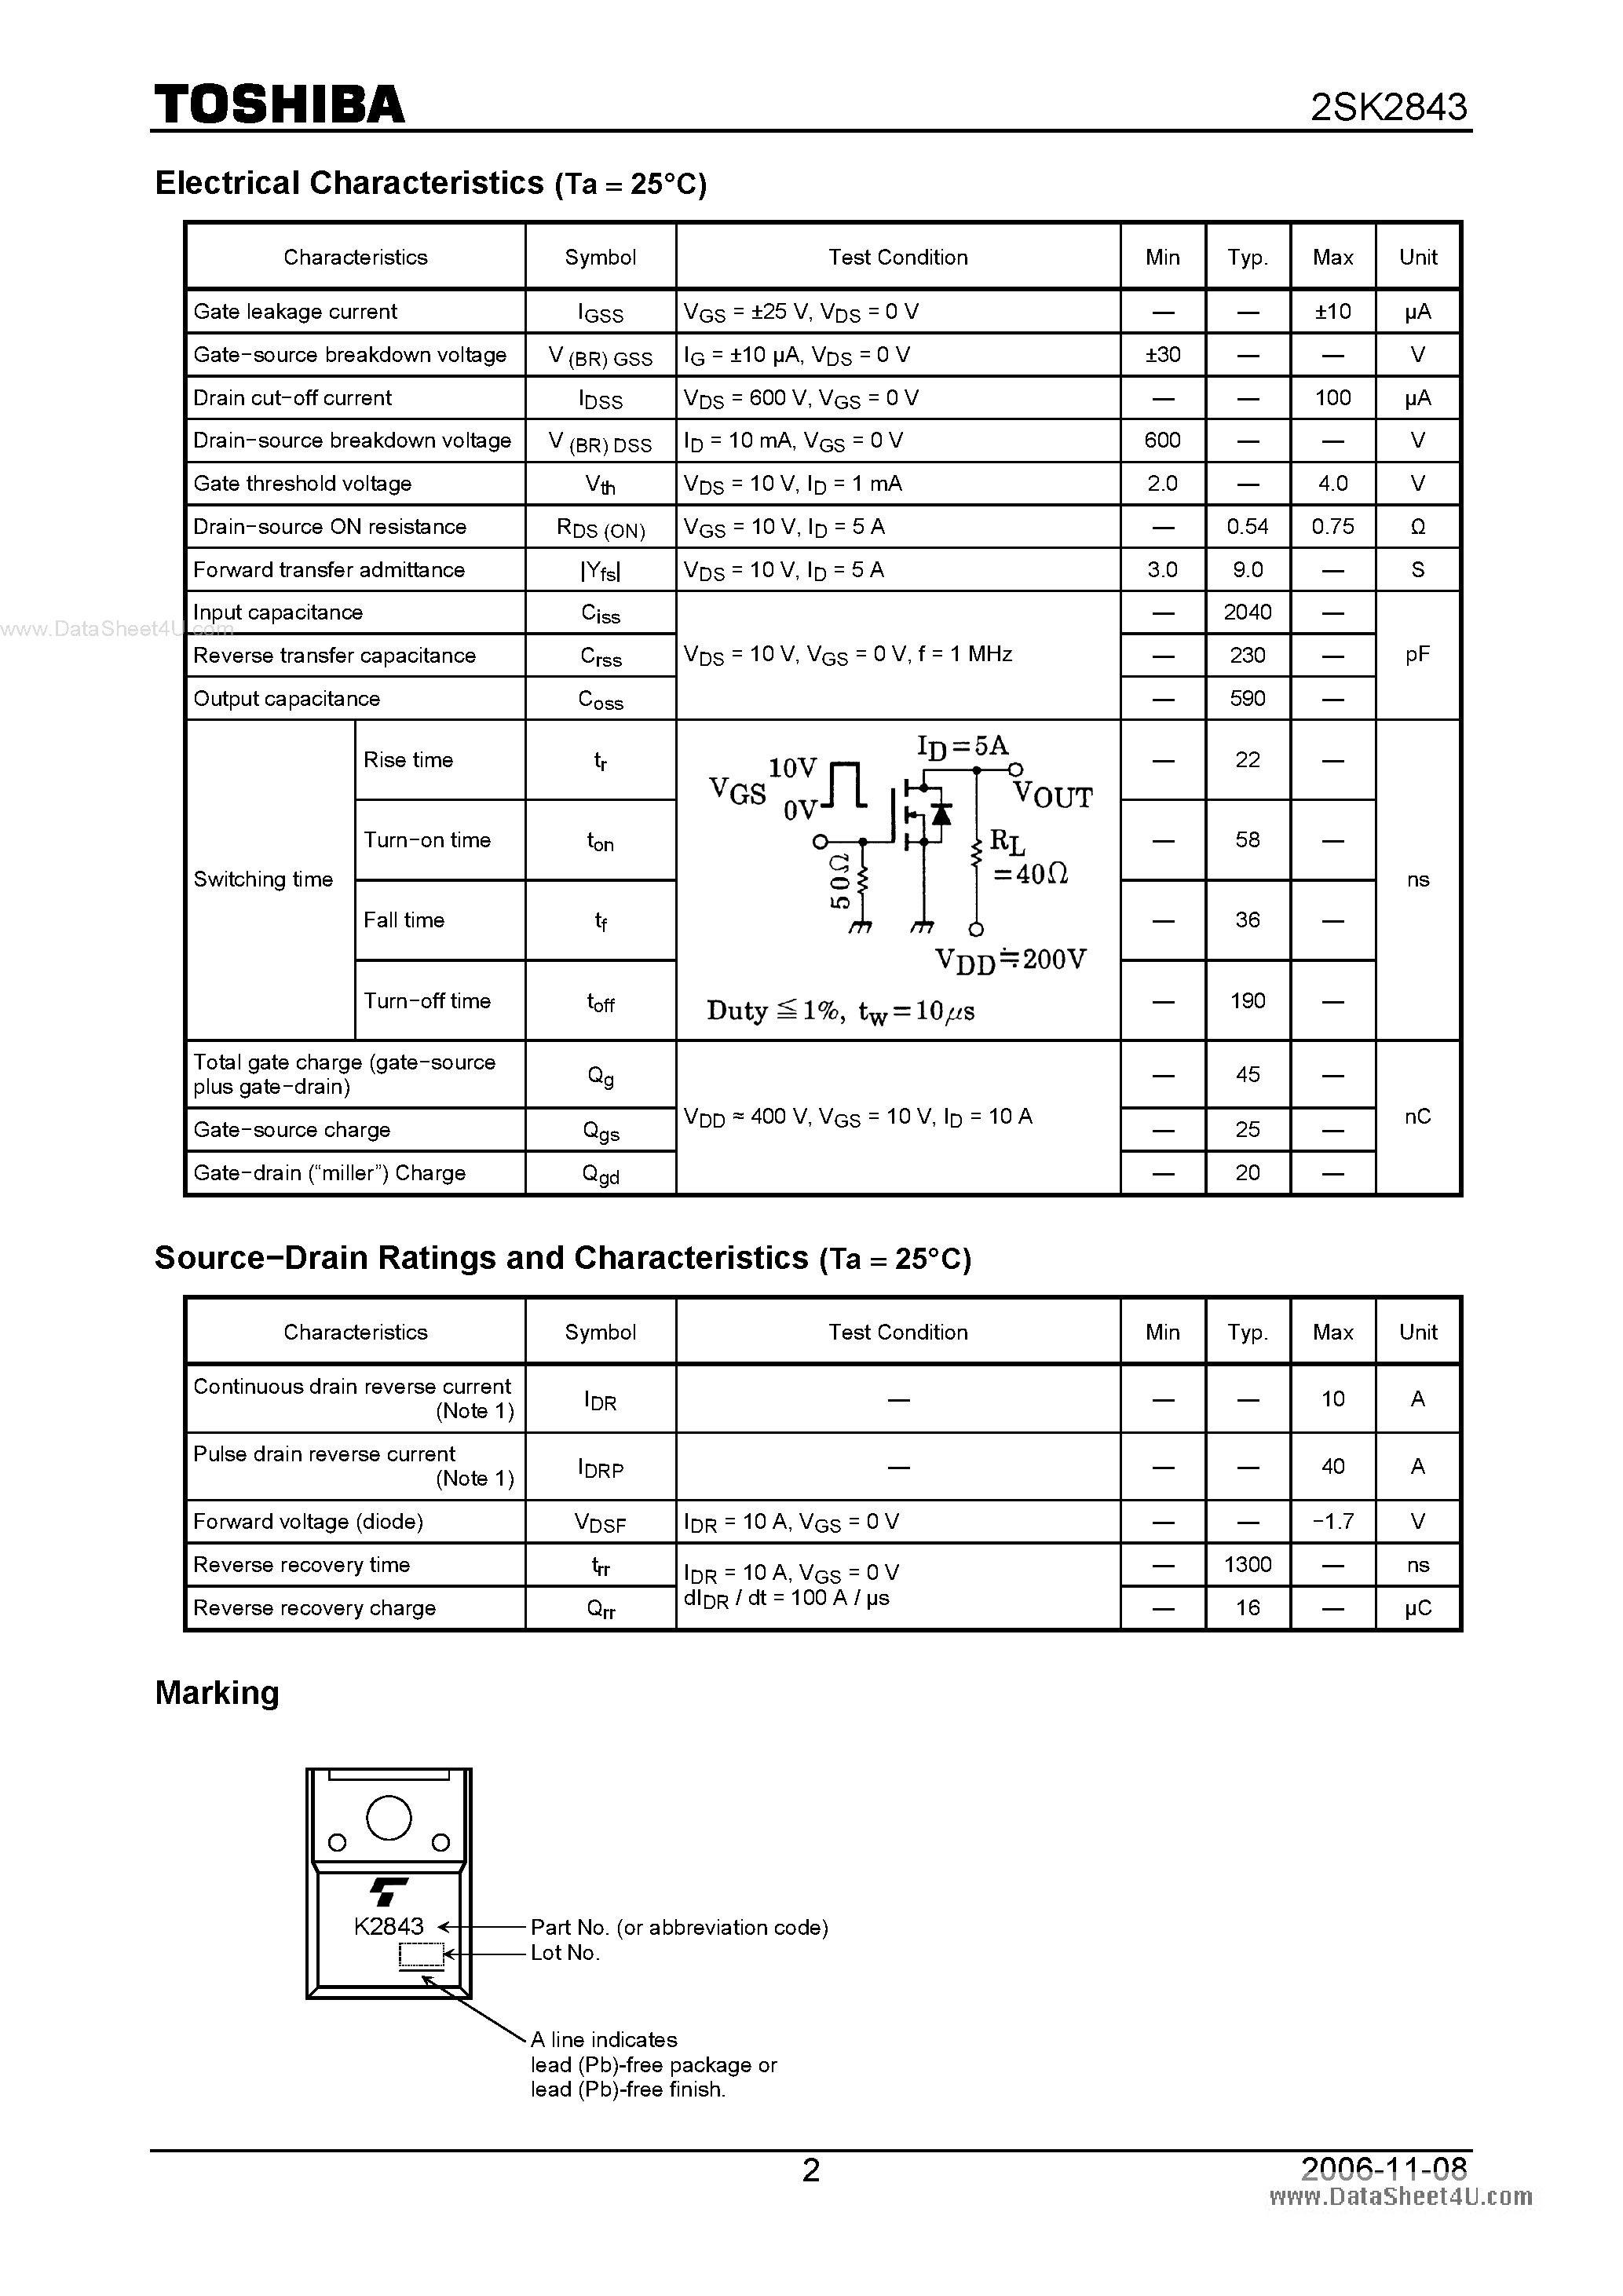 Datasheet K2843 - Search -----> 2SK2843 page 2